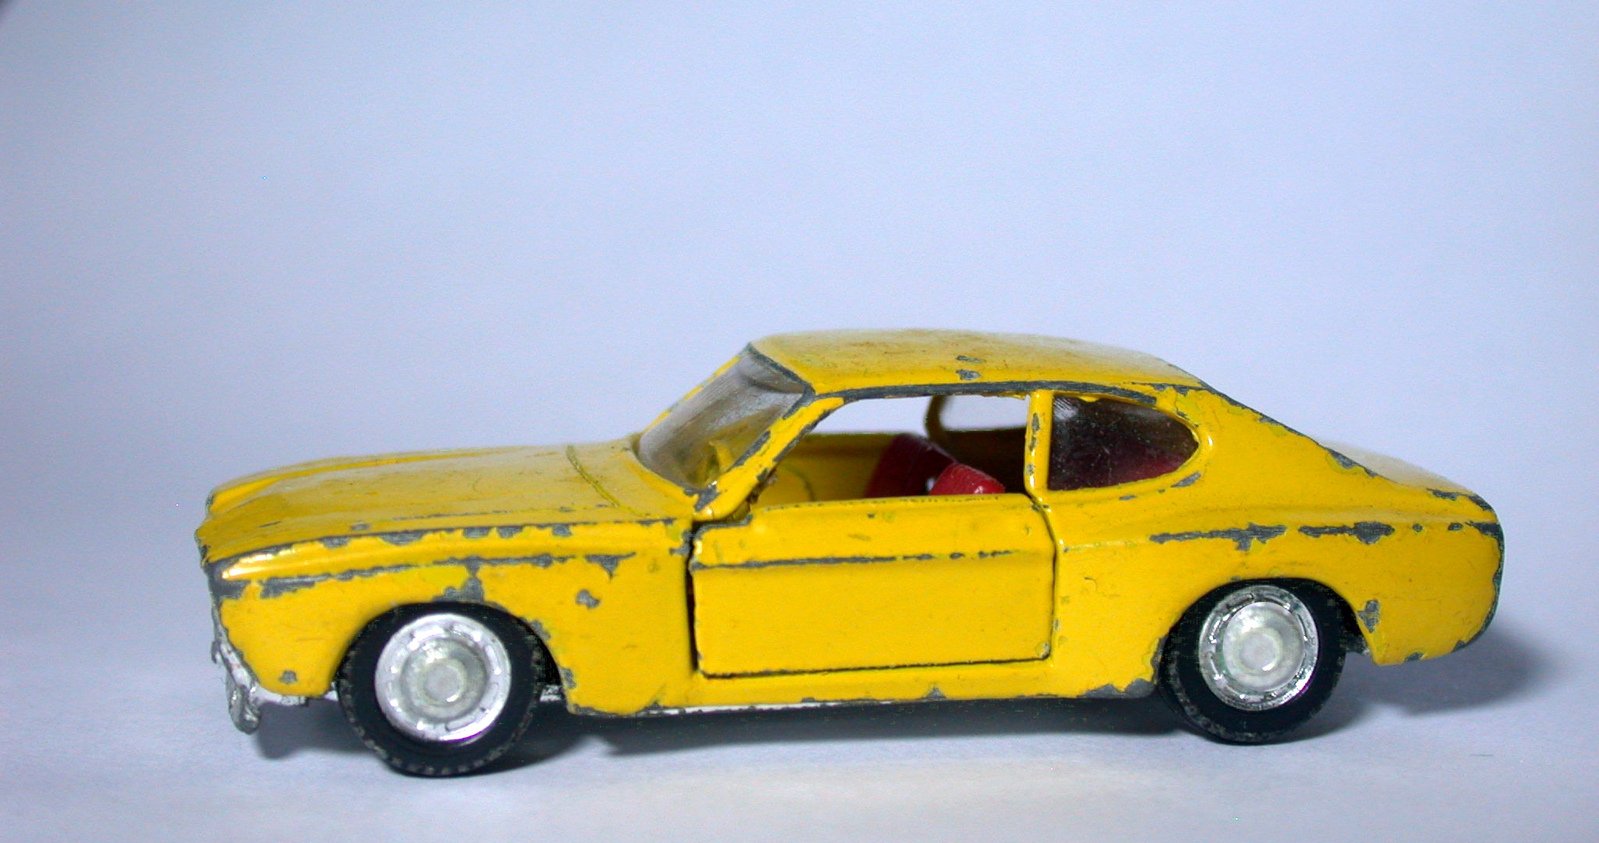 an old yellow toy car sitting on a table